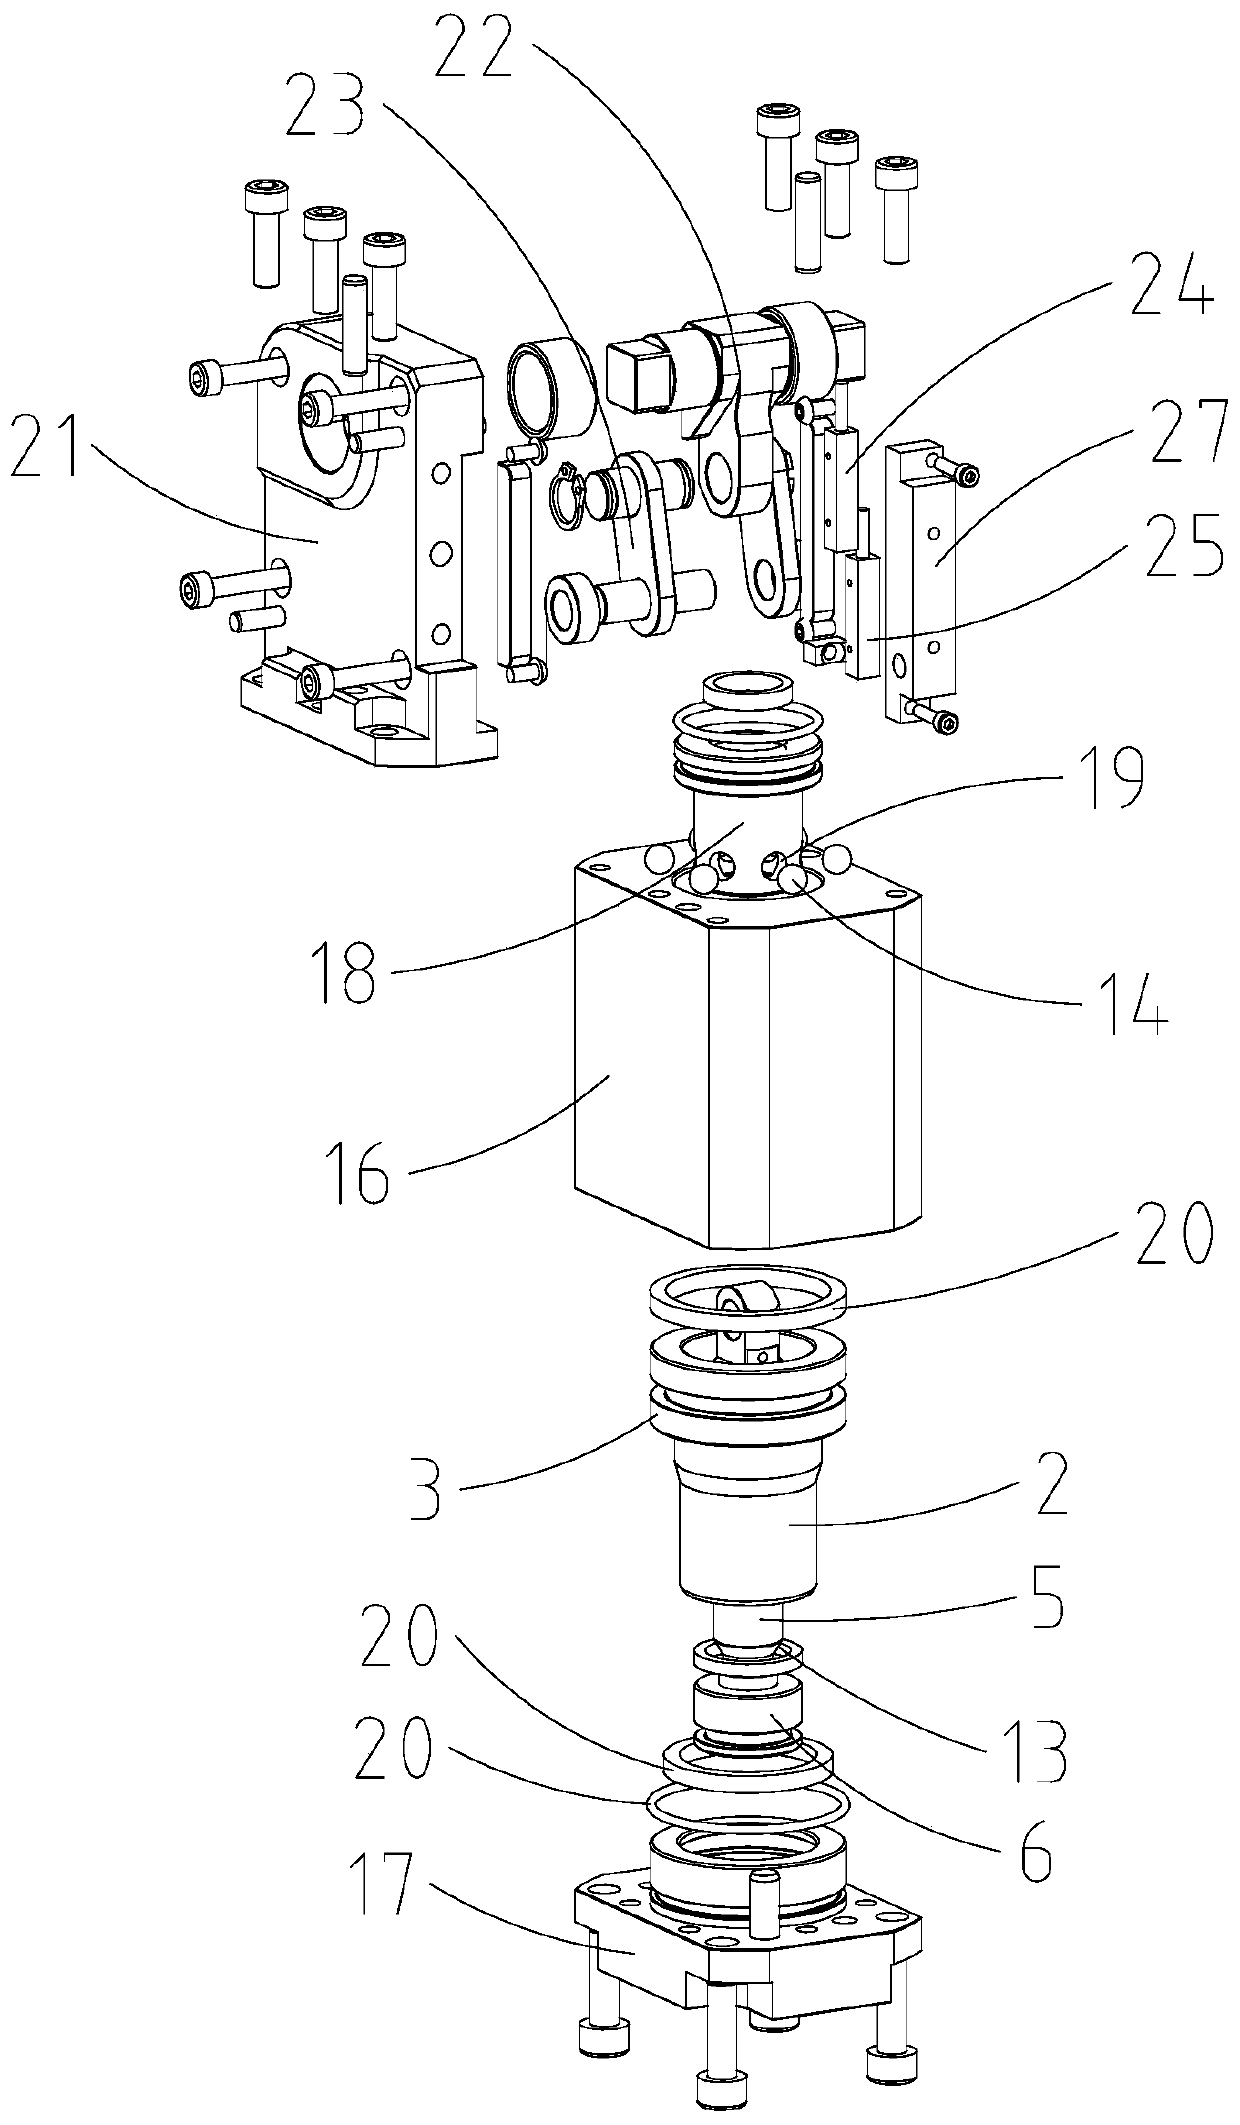 Pressurizing cylinder and clamp device applying same